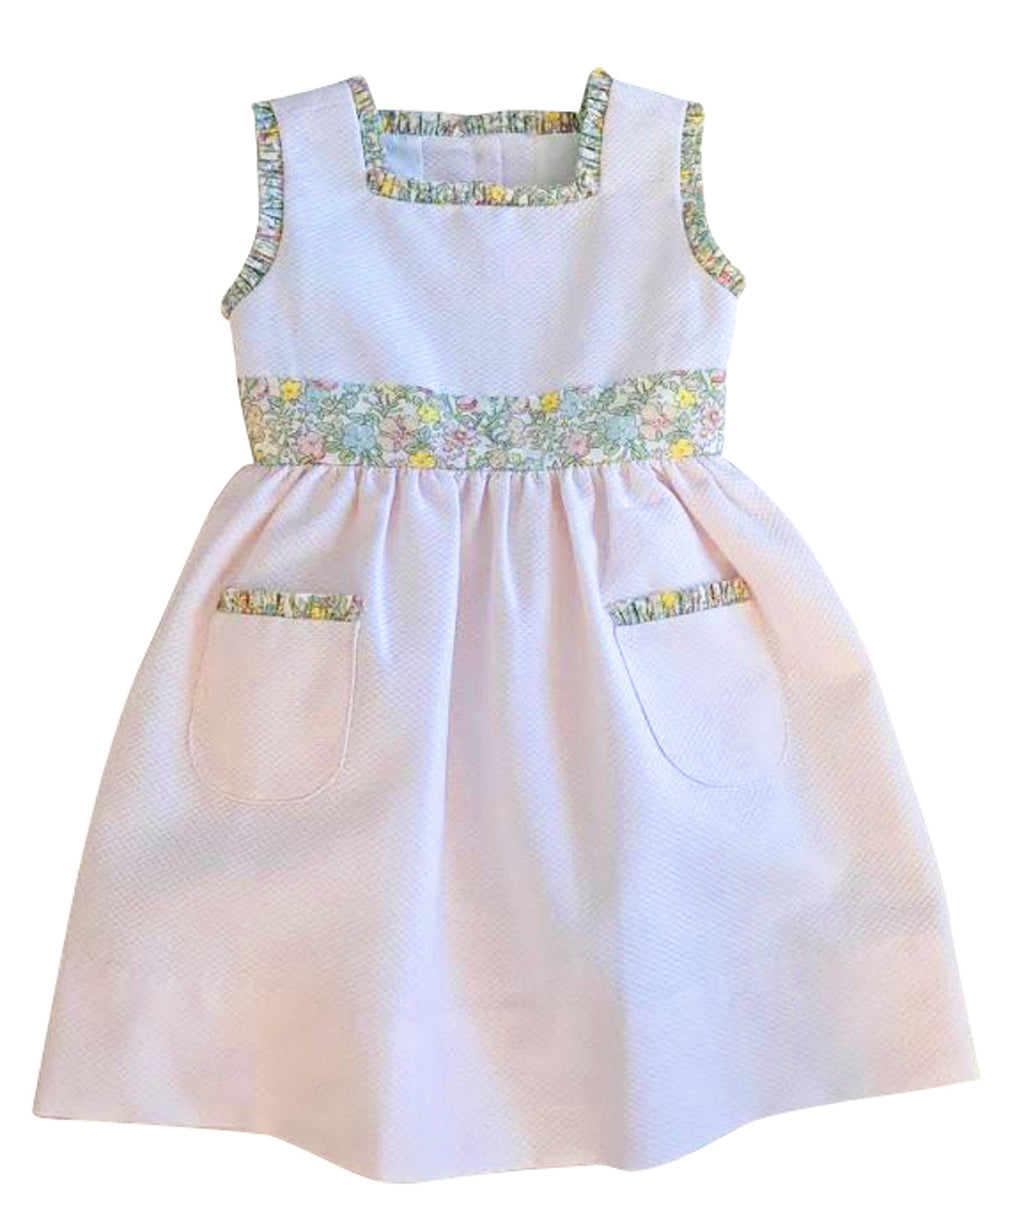 Spring Again Floral Pink Pique dress - Little Threads Inc. Children's Clothing